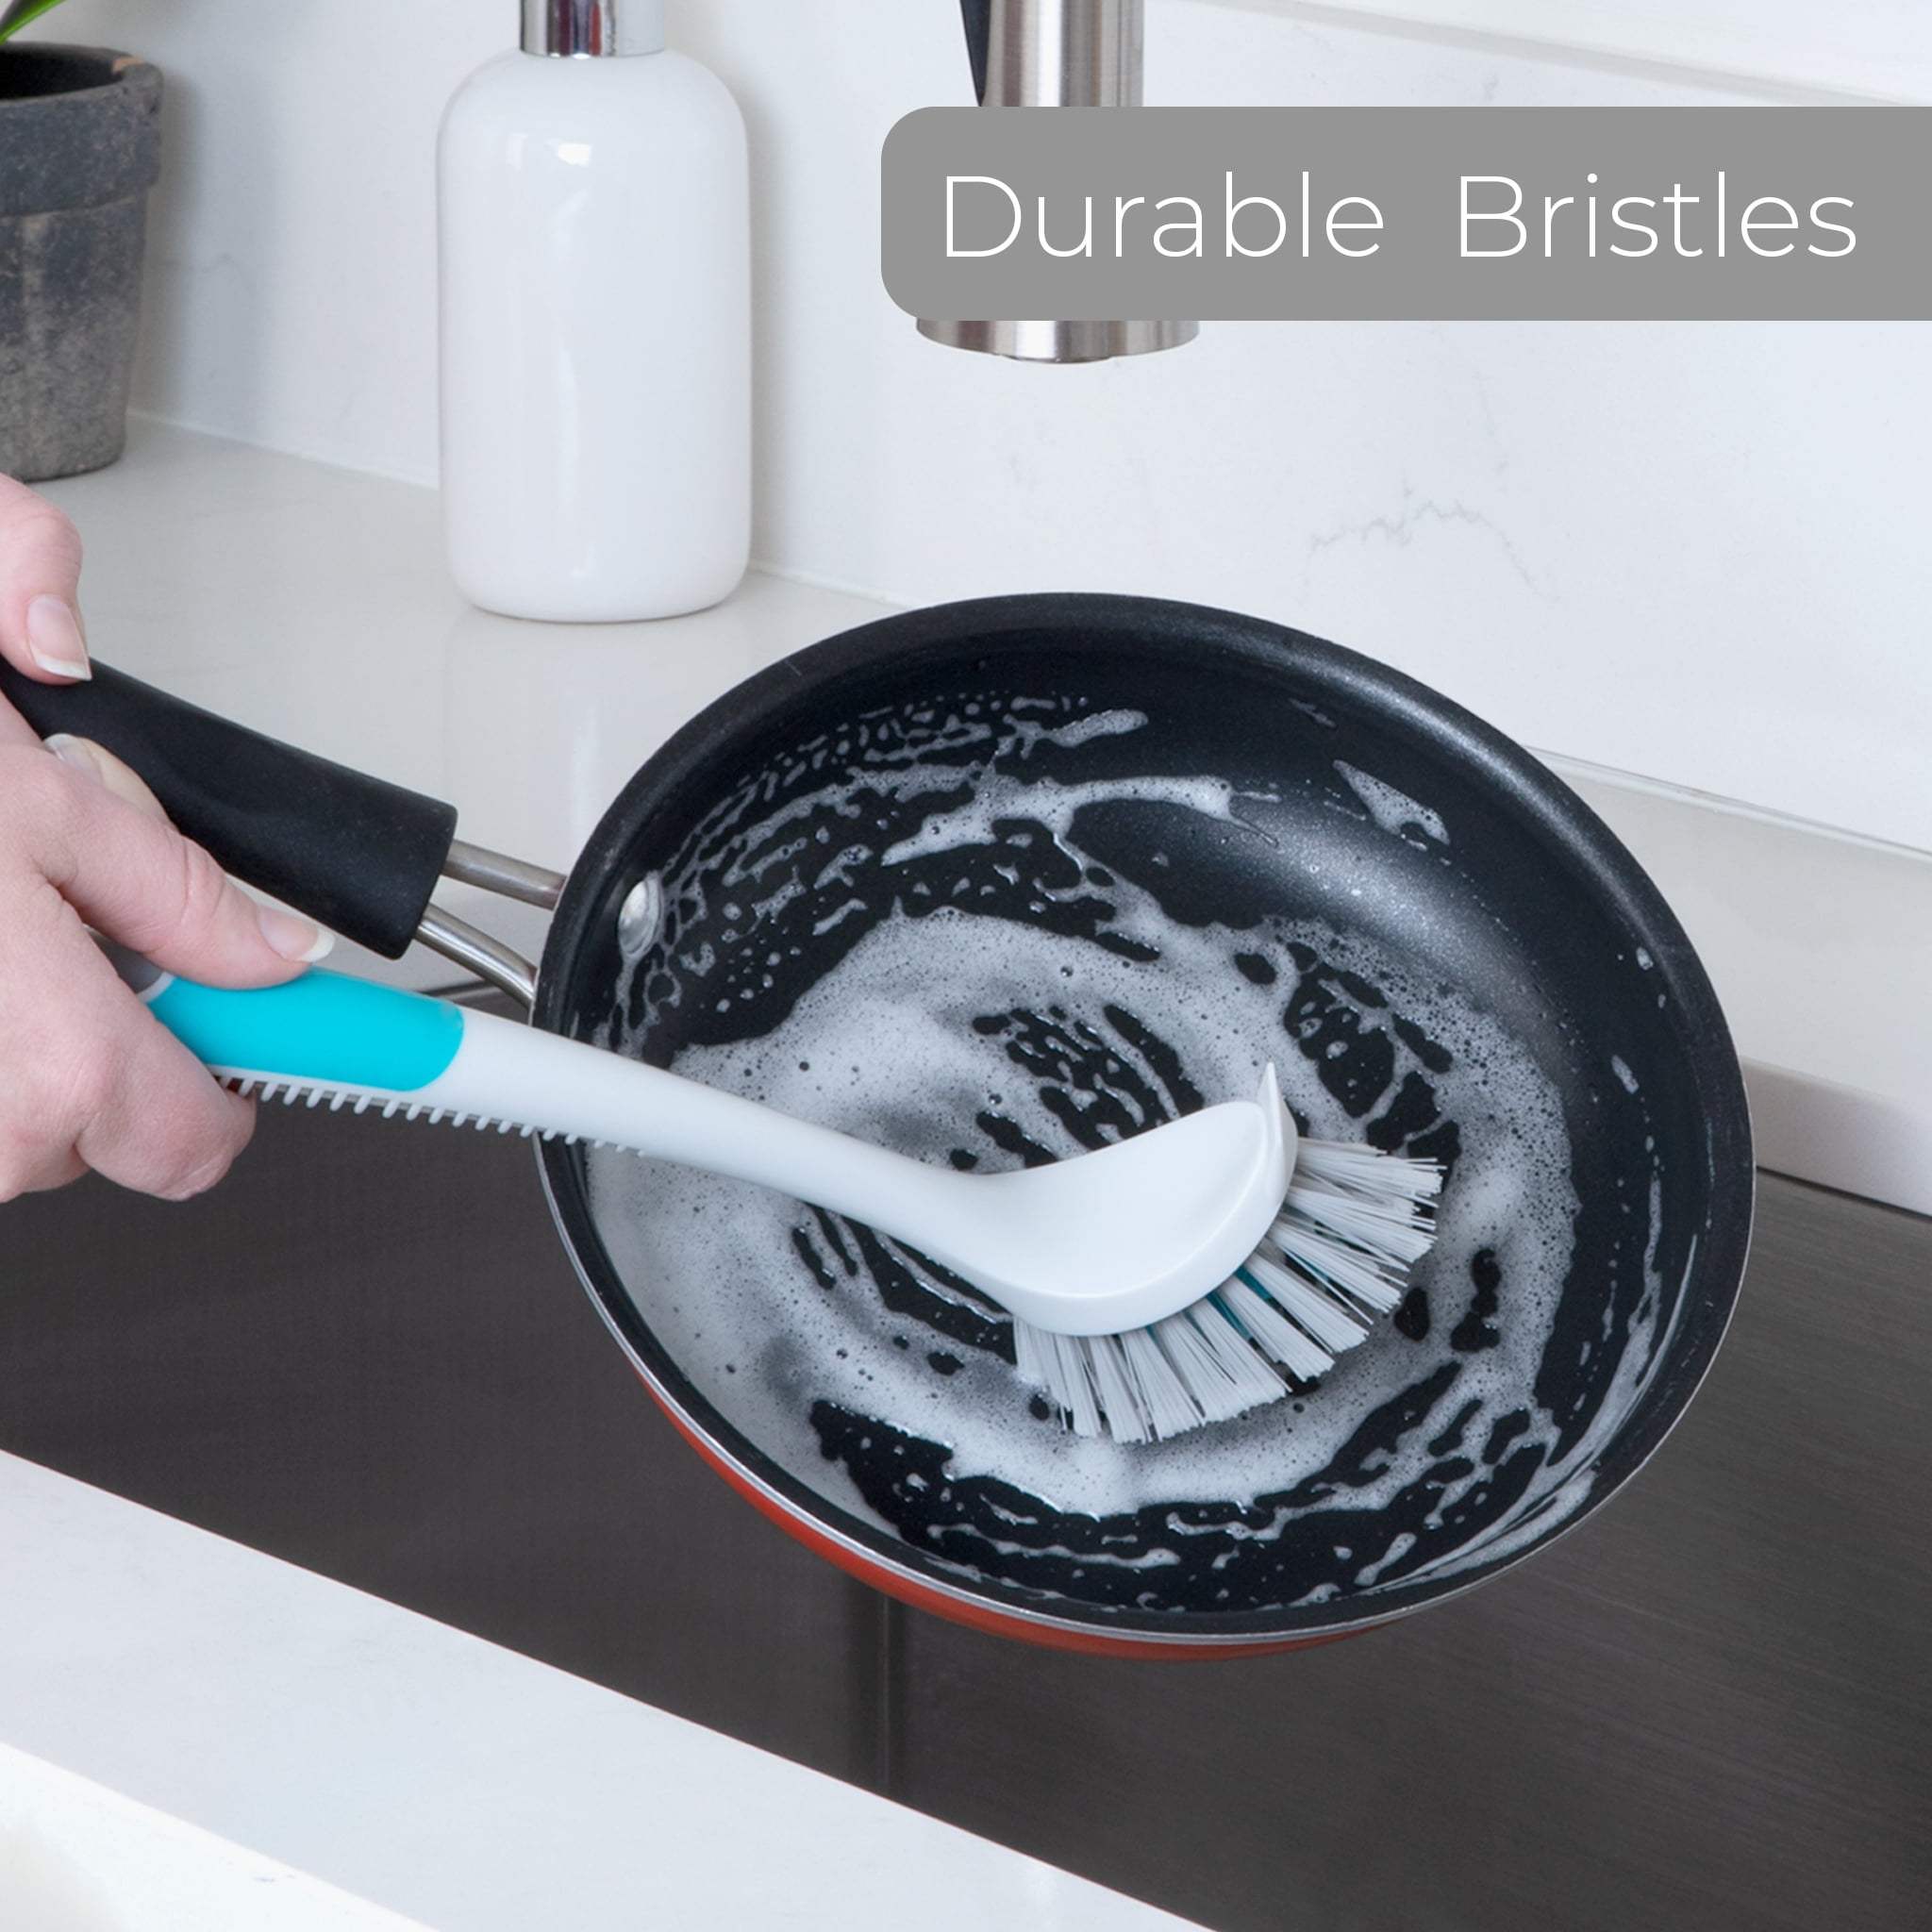 Scrub Brush with Suction Handle - 10.5 x 2 x 2.75 Inches | Smart Design Cleaning